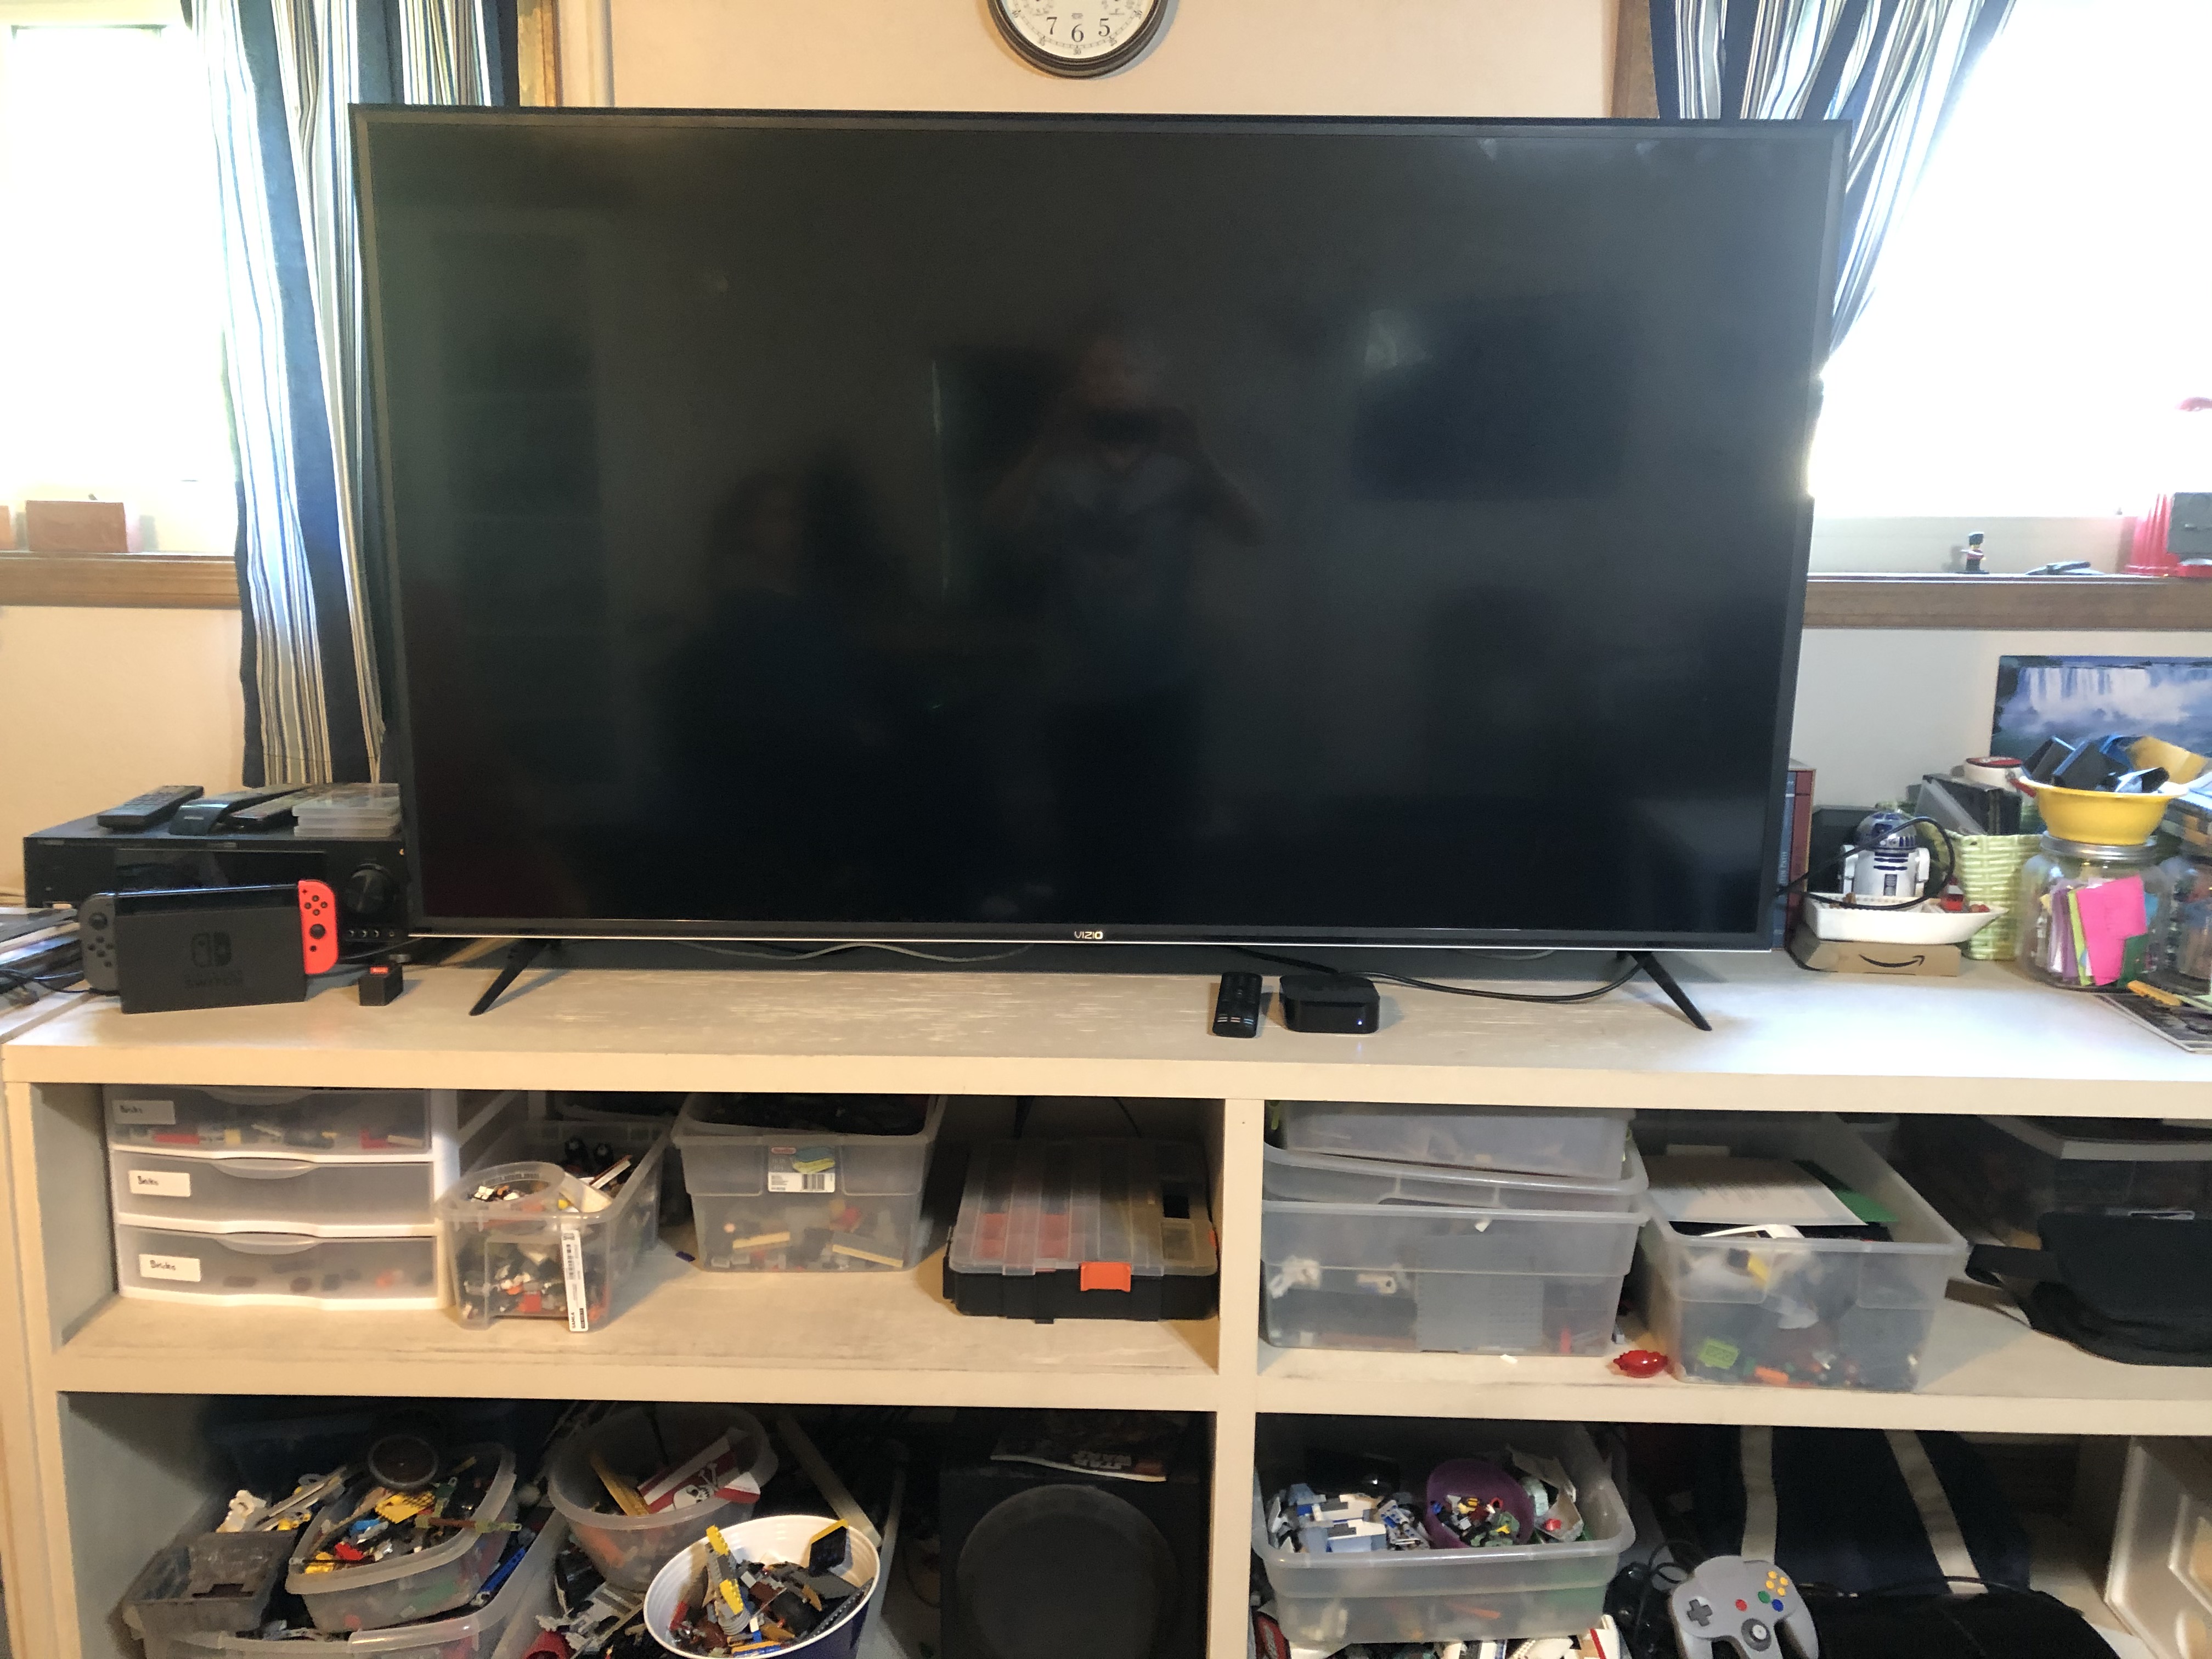 The Mancave's large TV